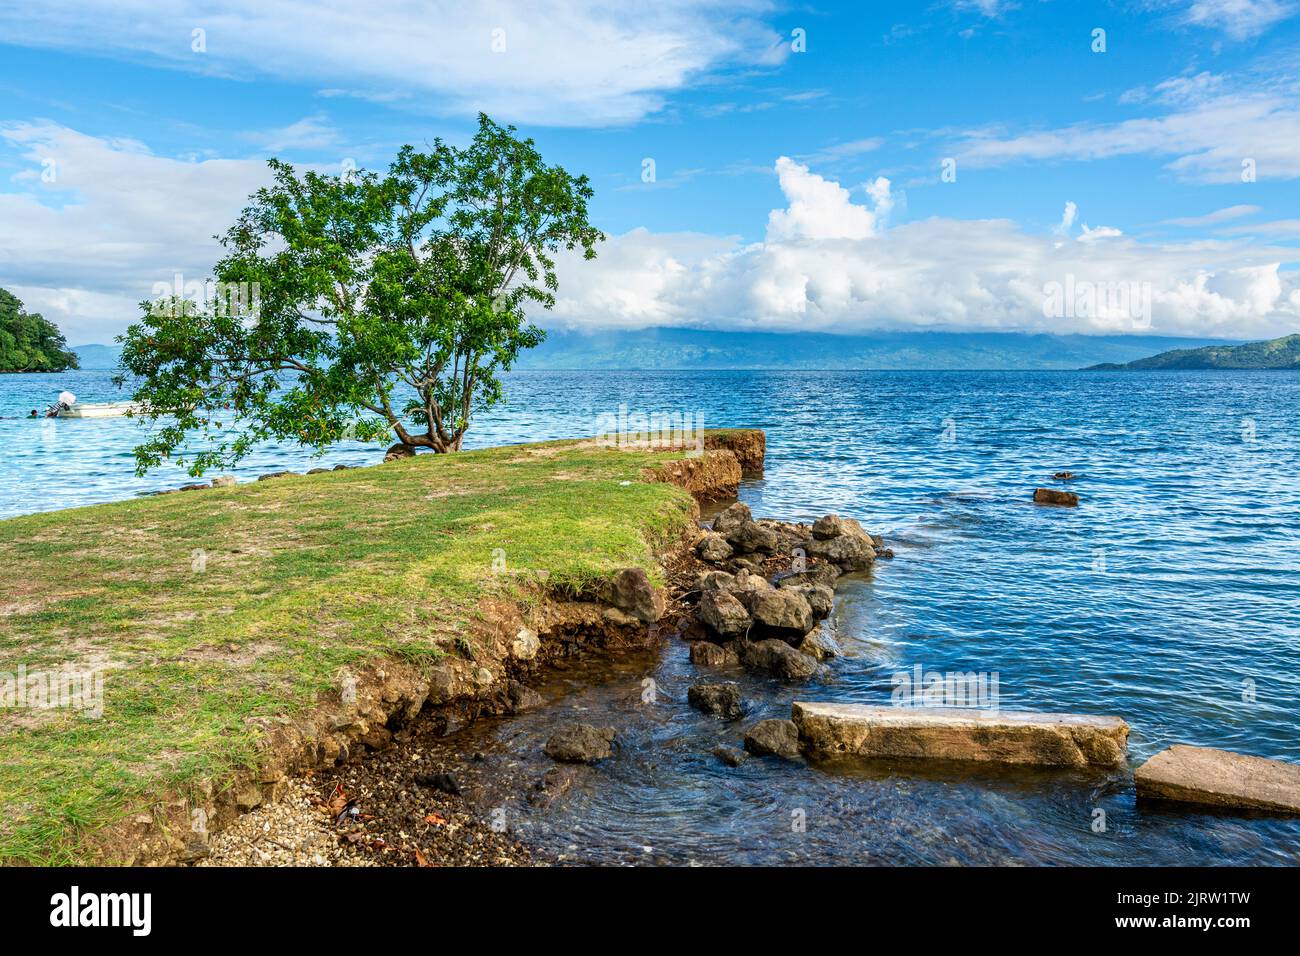 A small island outlet with a grassy overlook of a beautiful blue sky and ocean in tropical Fiji Stock Photo